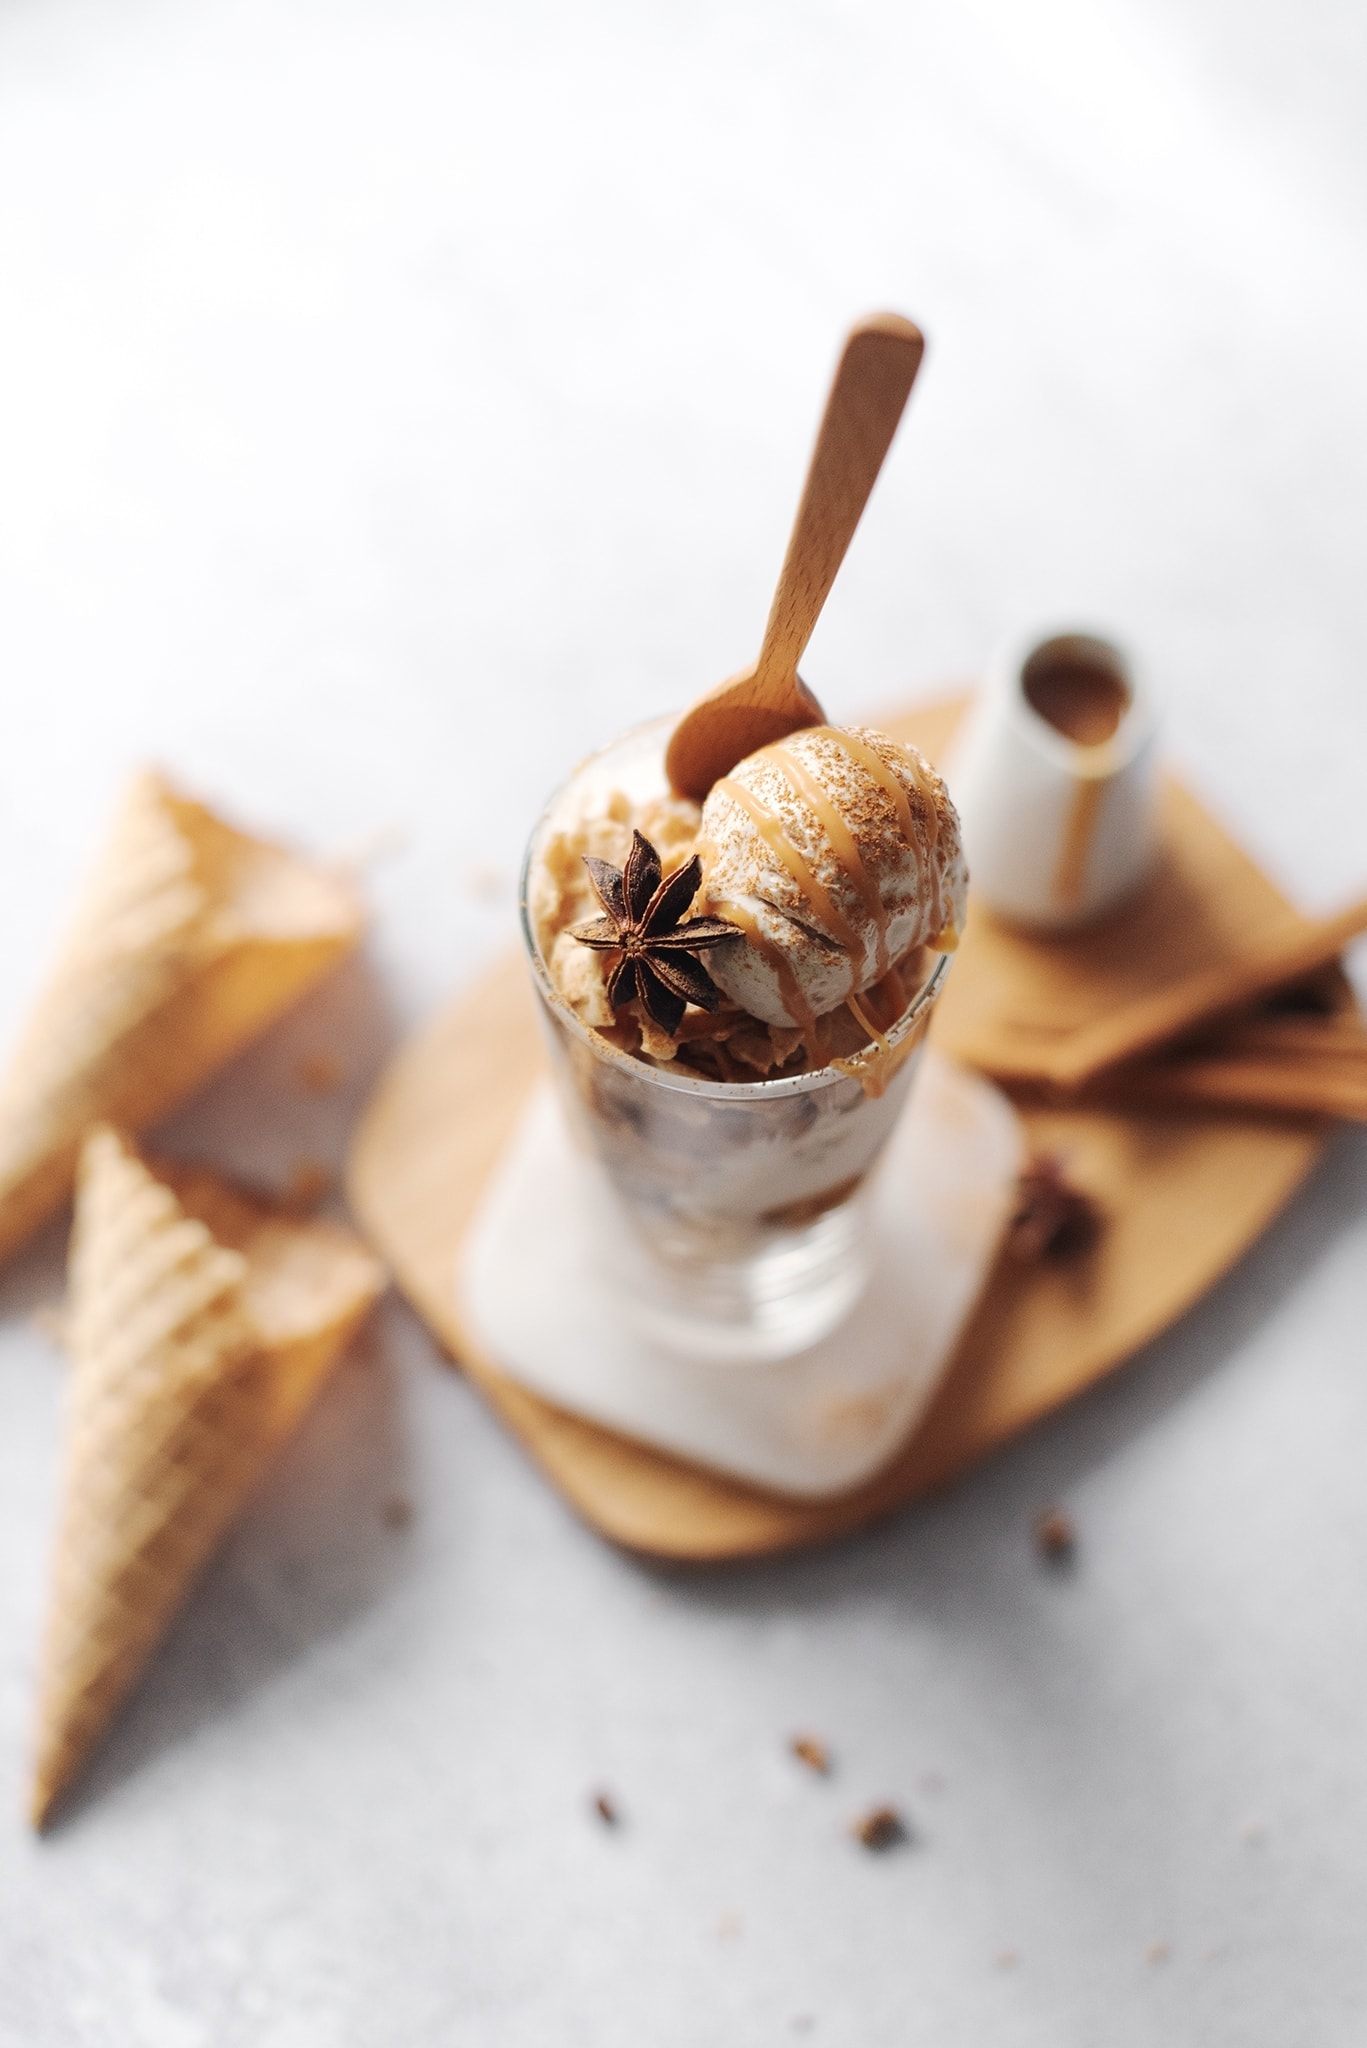 Chai spiced ice cream drizzled with caramel sauce and star anise